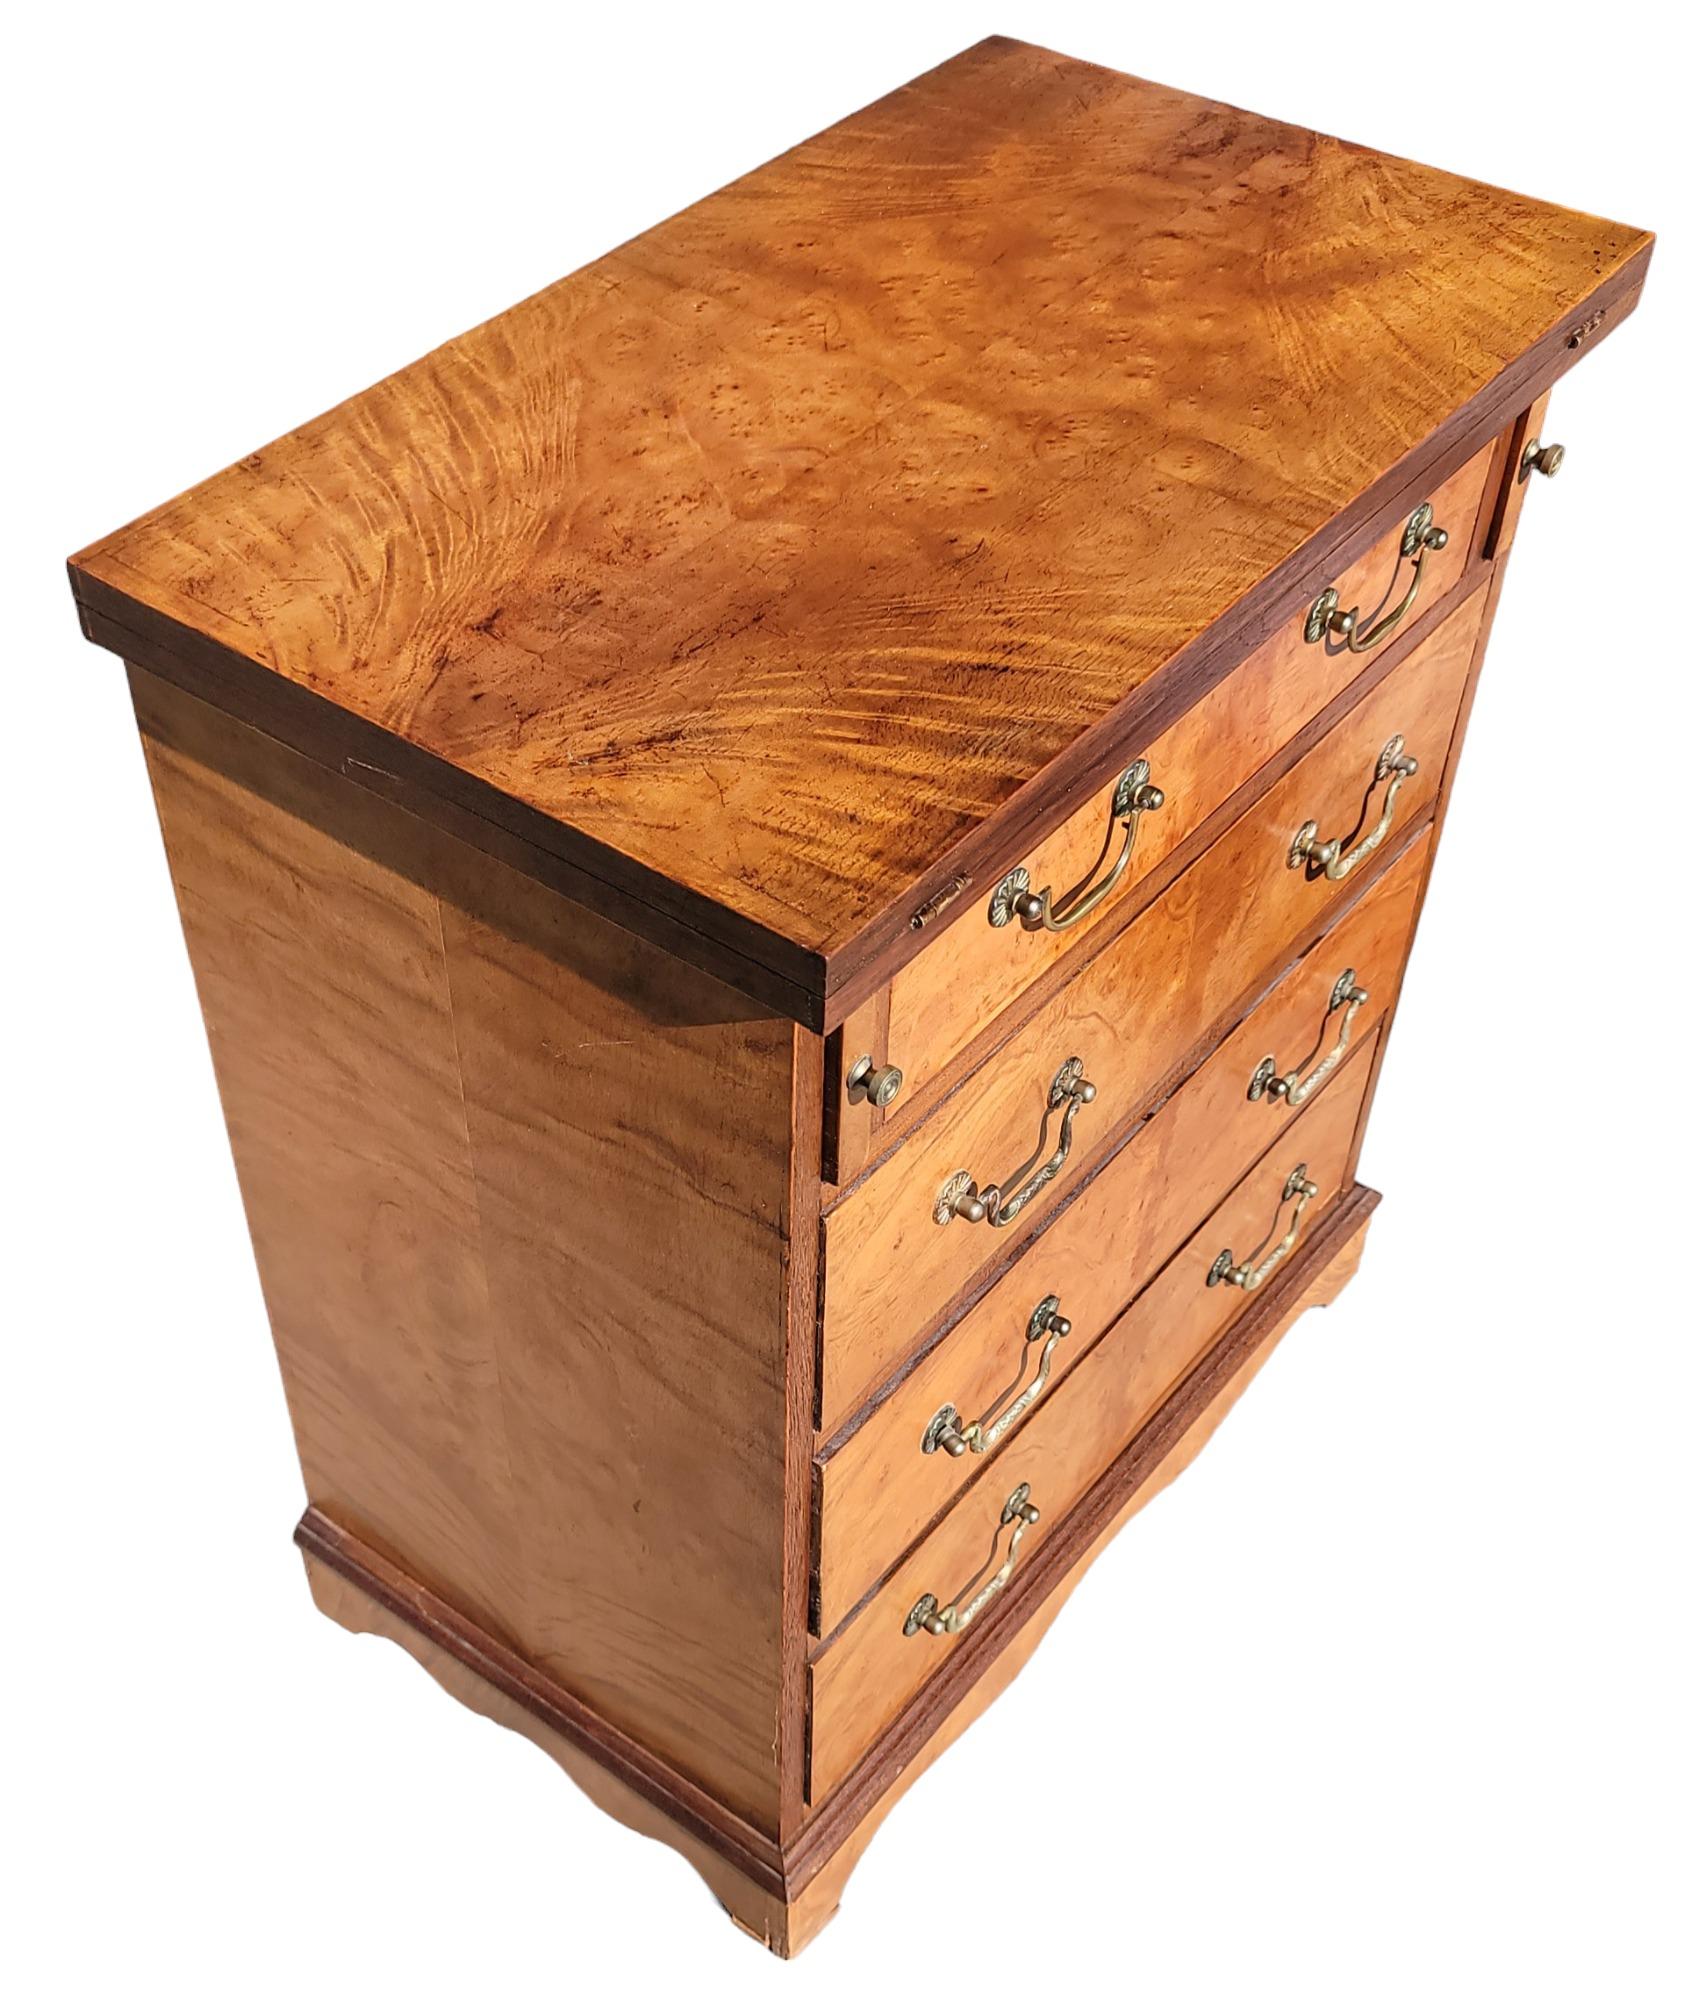 Walnut Bachelors Chest of Drawers with Brass Handles  In Good Condition For Sale In Pasadena, CA